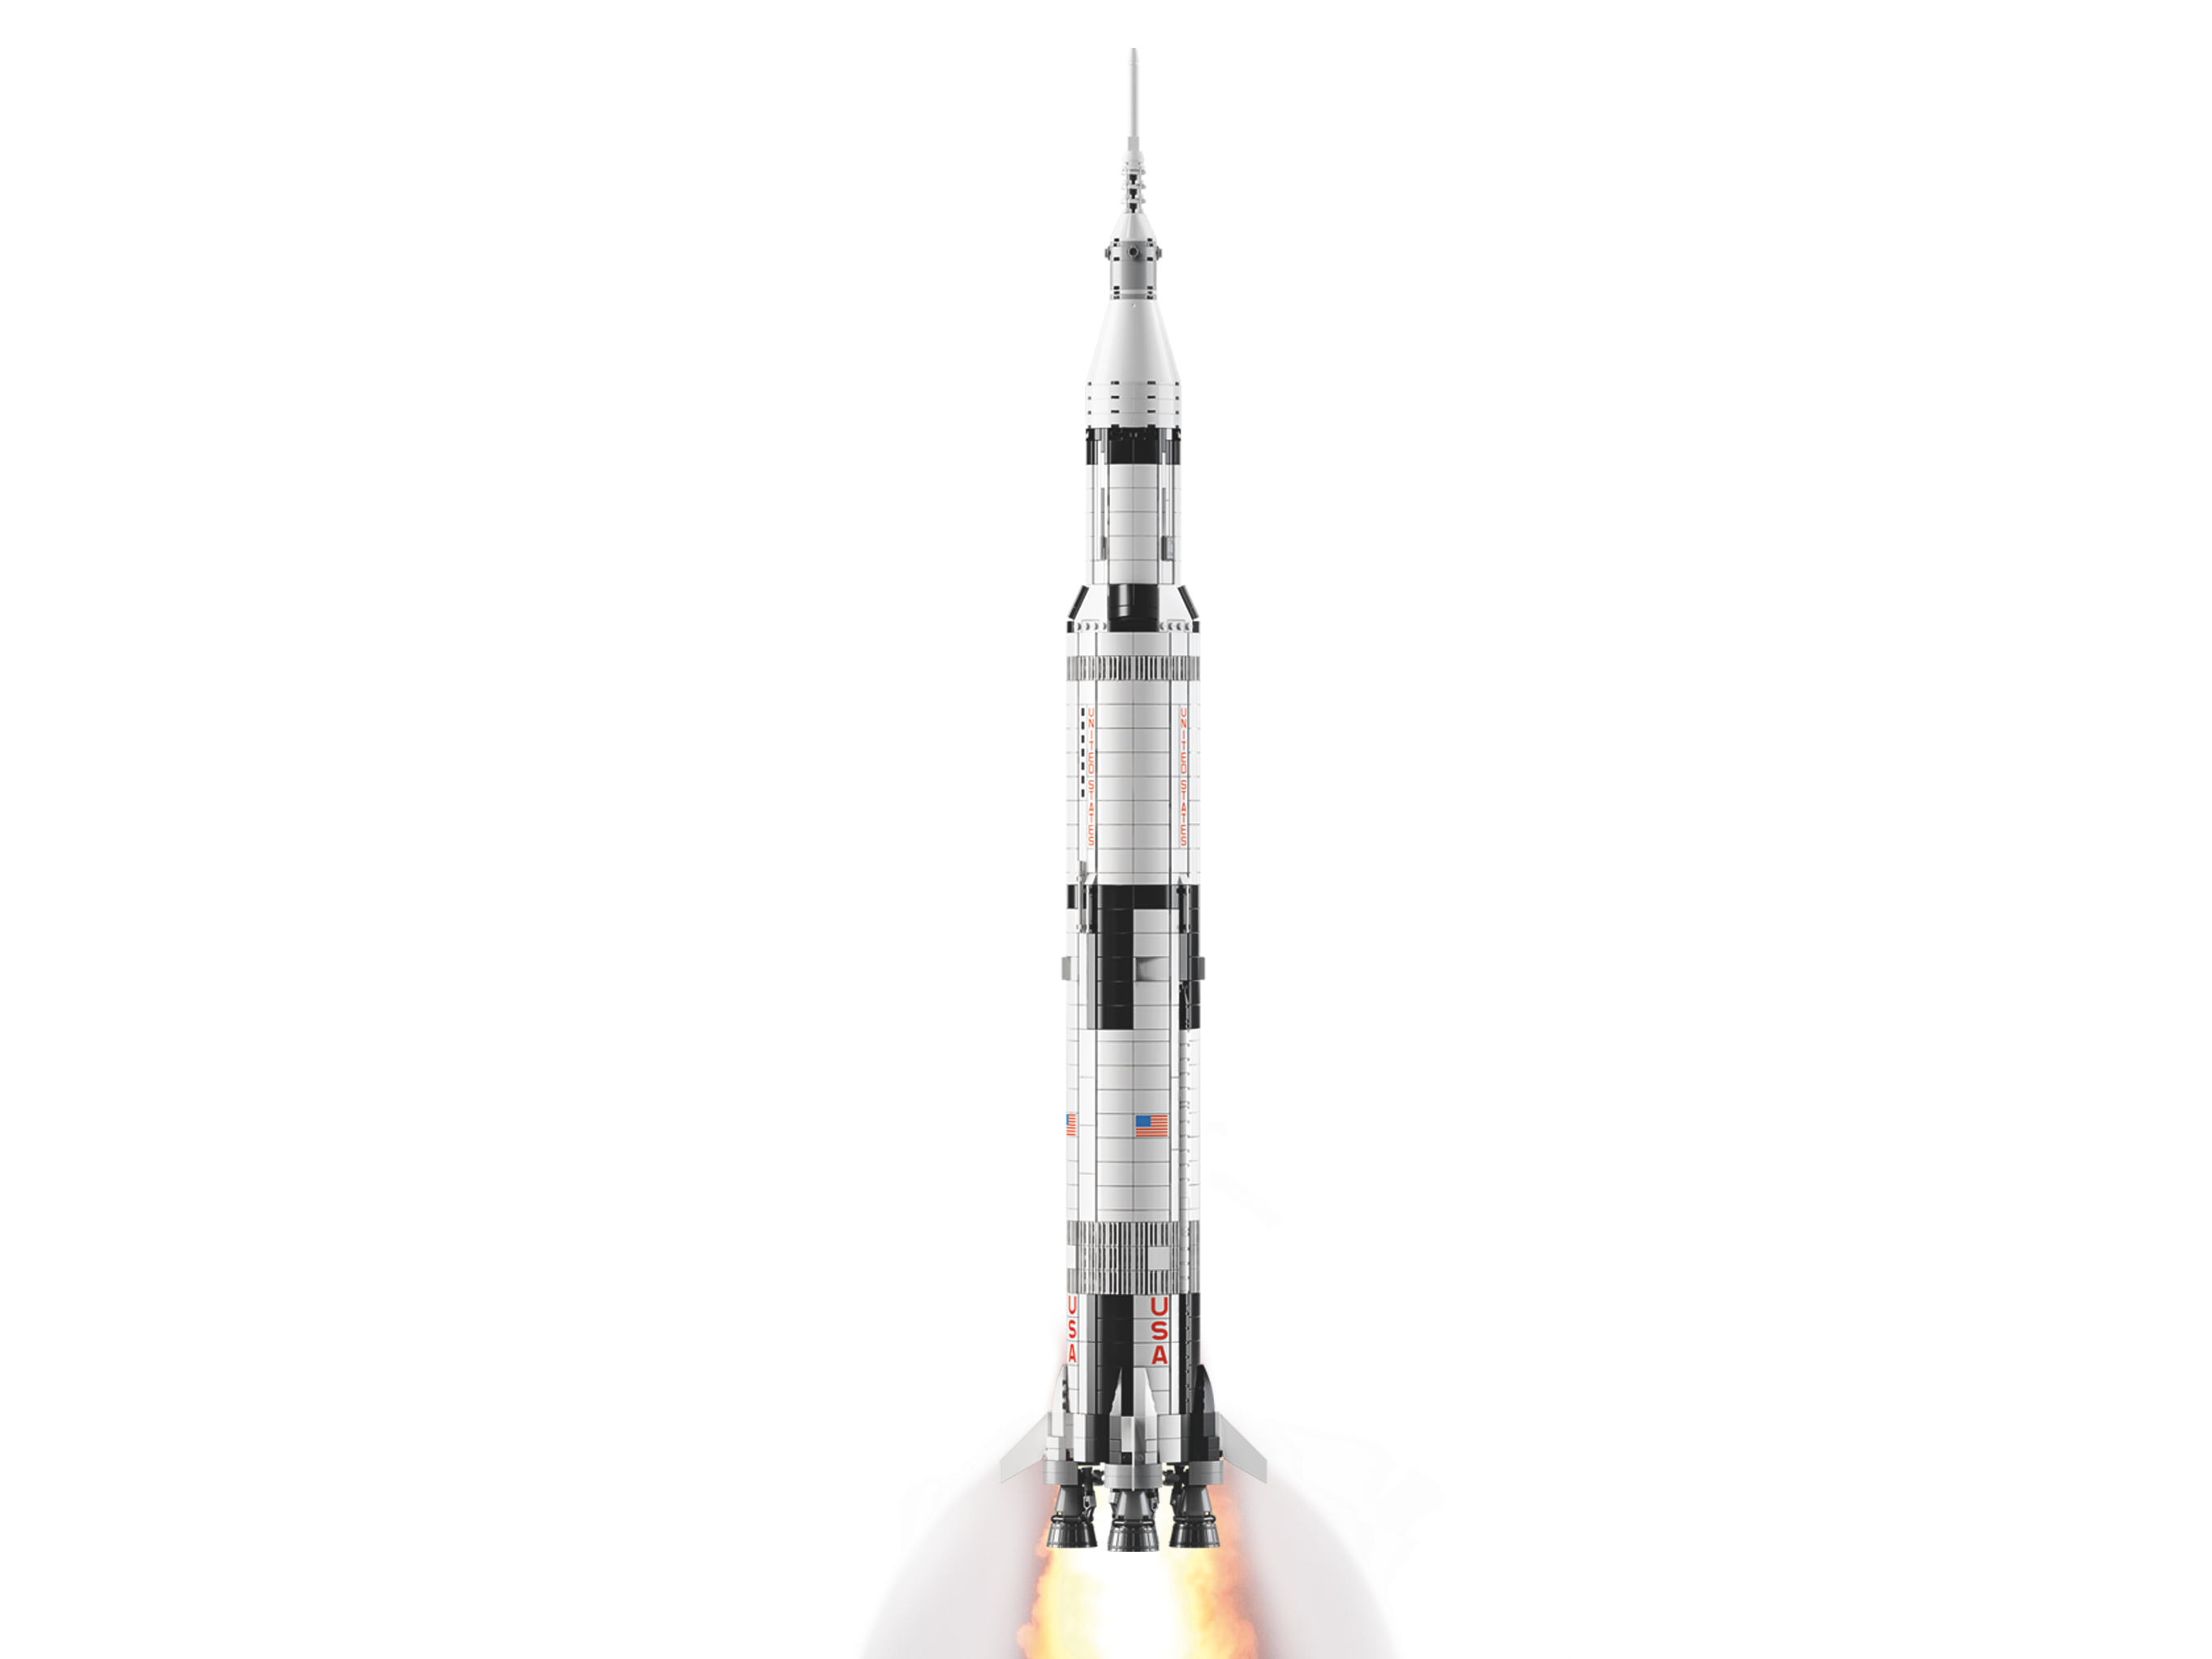  LEGO Ideas NASA Apollo Saturn V 92176 Outer Space Model Rocket  for Kids and Adults, Science Building Kit (1969 Pieces) : Toys & Games